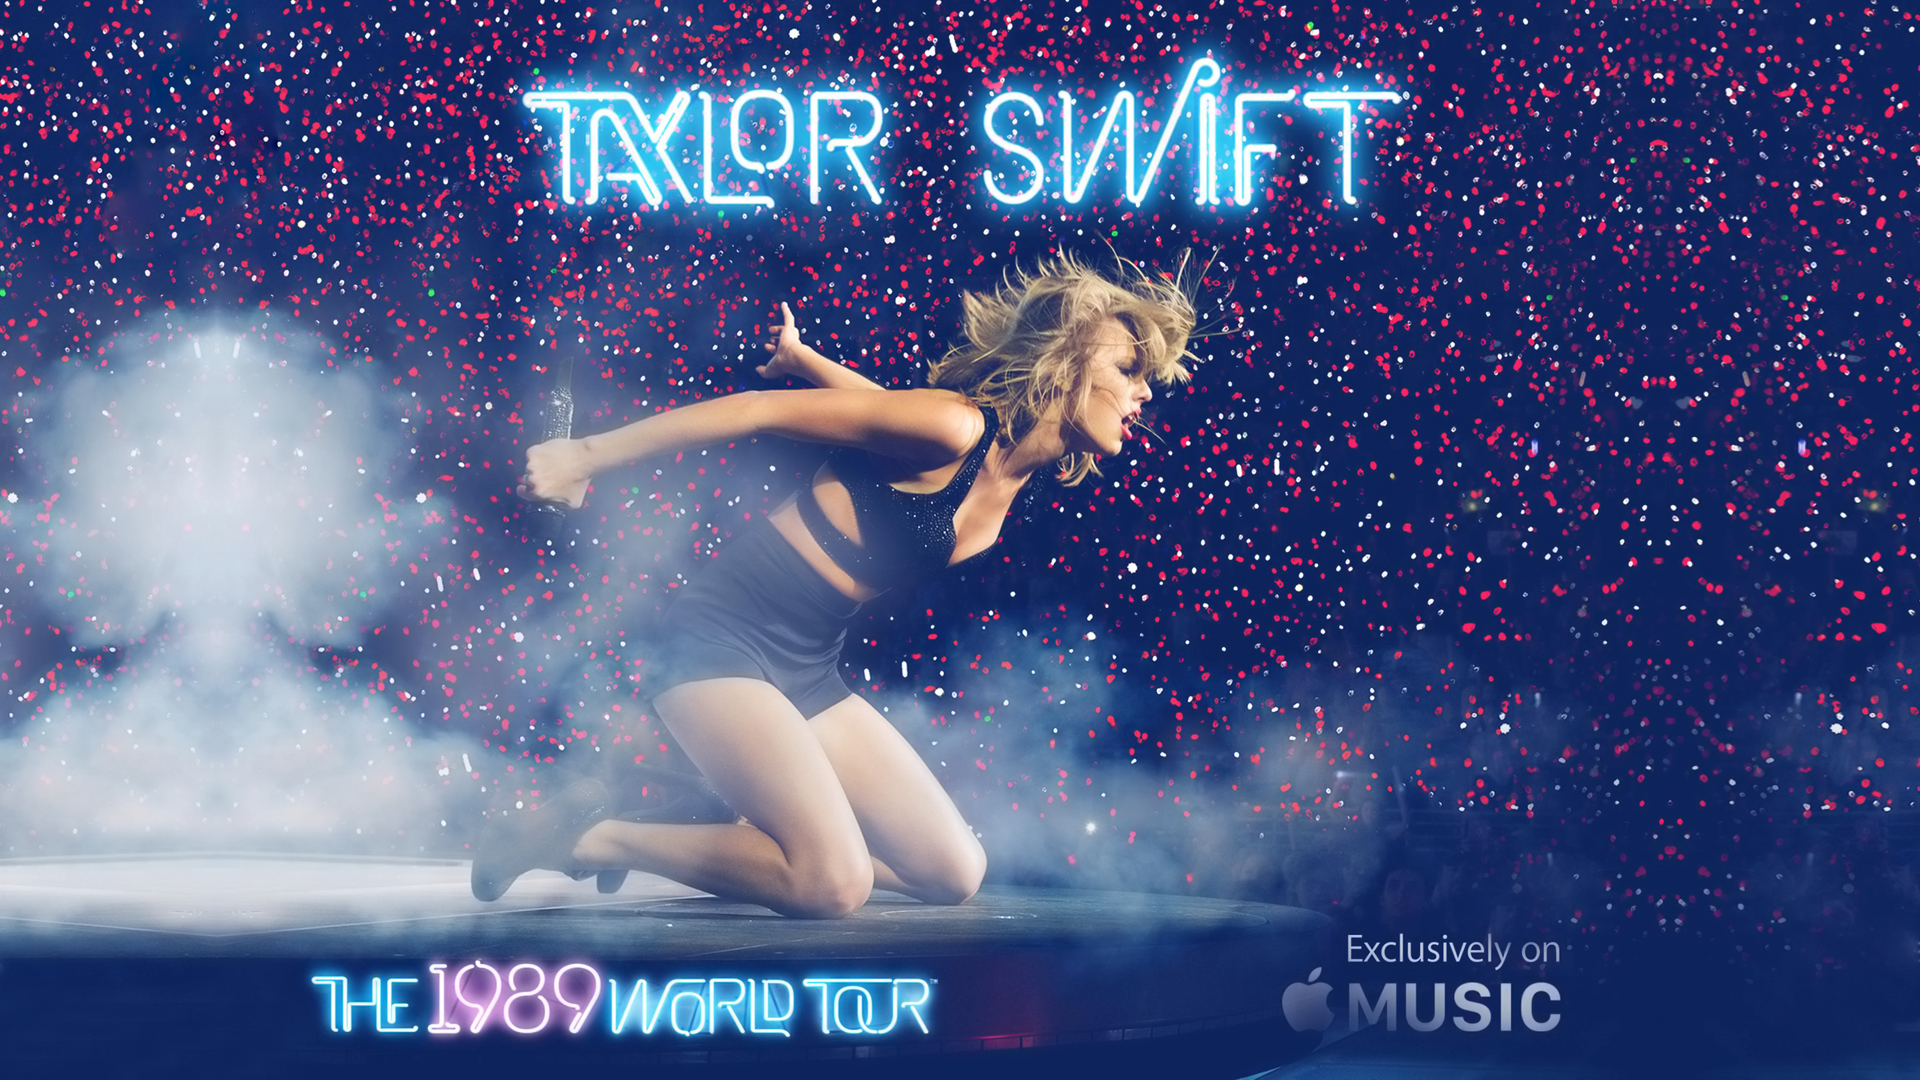 Free download Taylor Swift 1989 World Tour Wallpaper01 by FunkyCop999 on [1920x1080] for your Desktop, Mobile & Tablet. Explore 1989 Wallpaper Wallpaper, Zetsuai 1989 Wallpaper, Batman 1989 Wallpaper